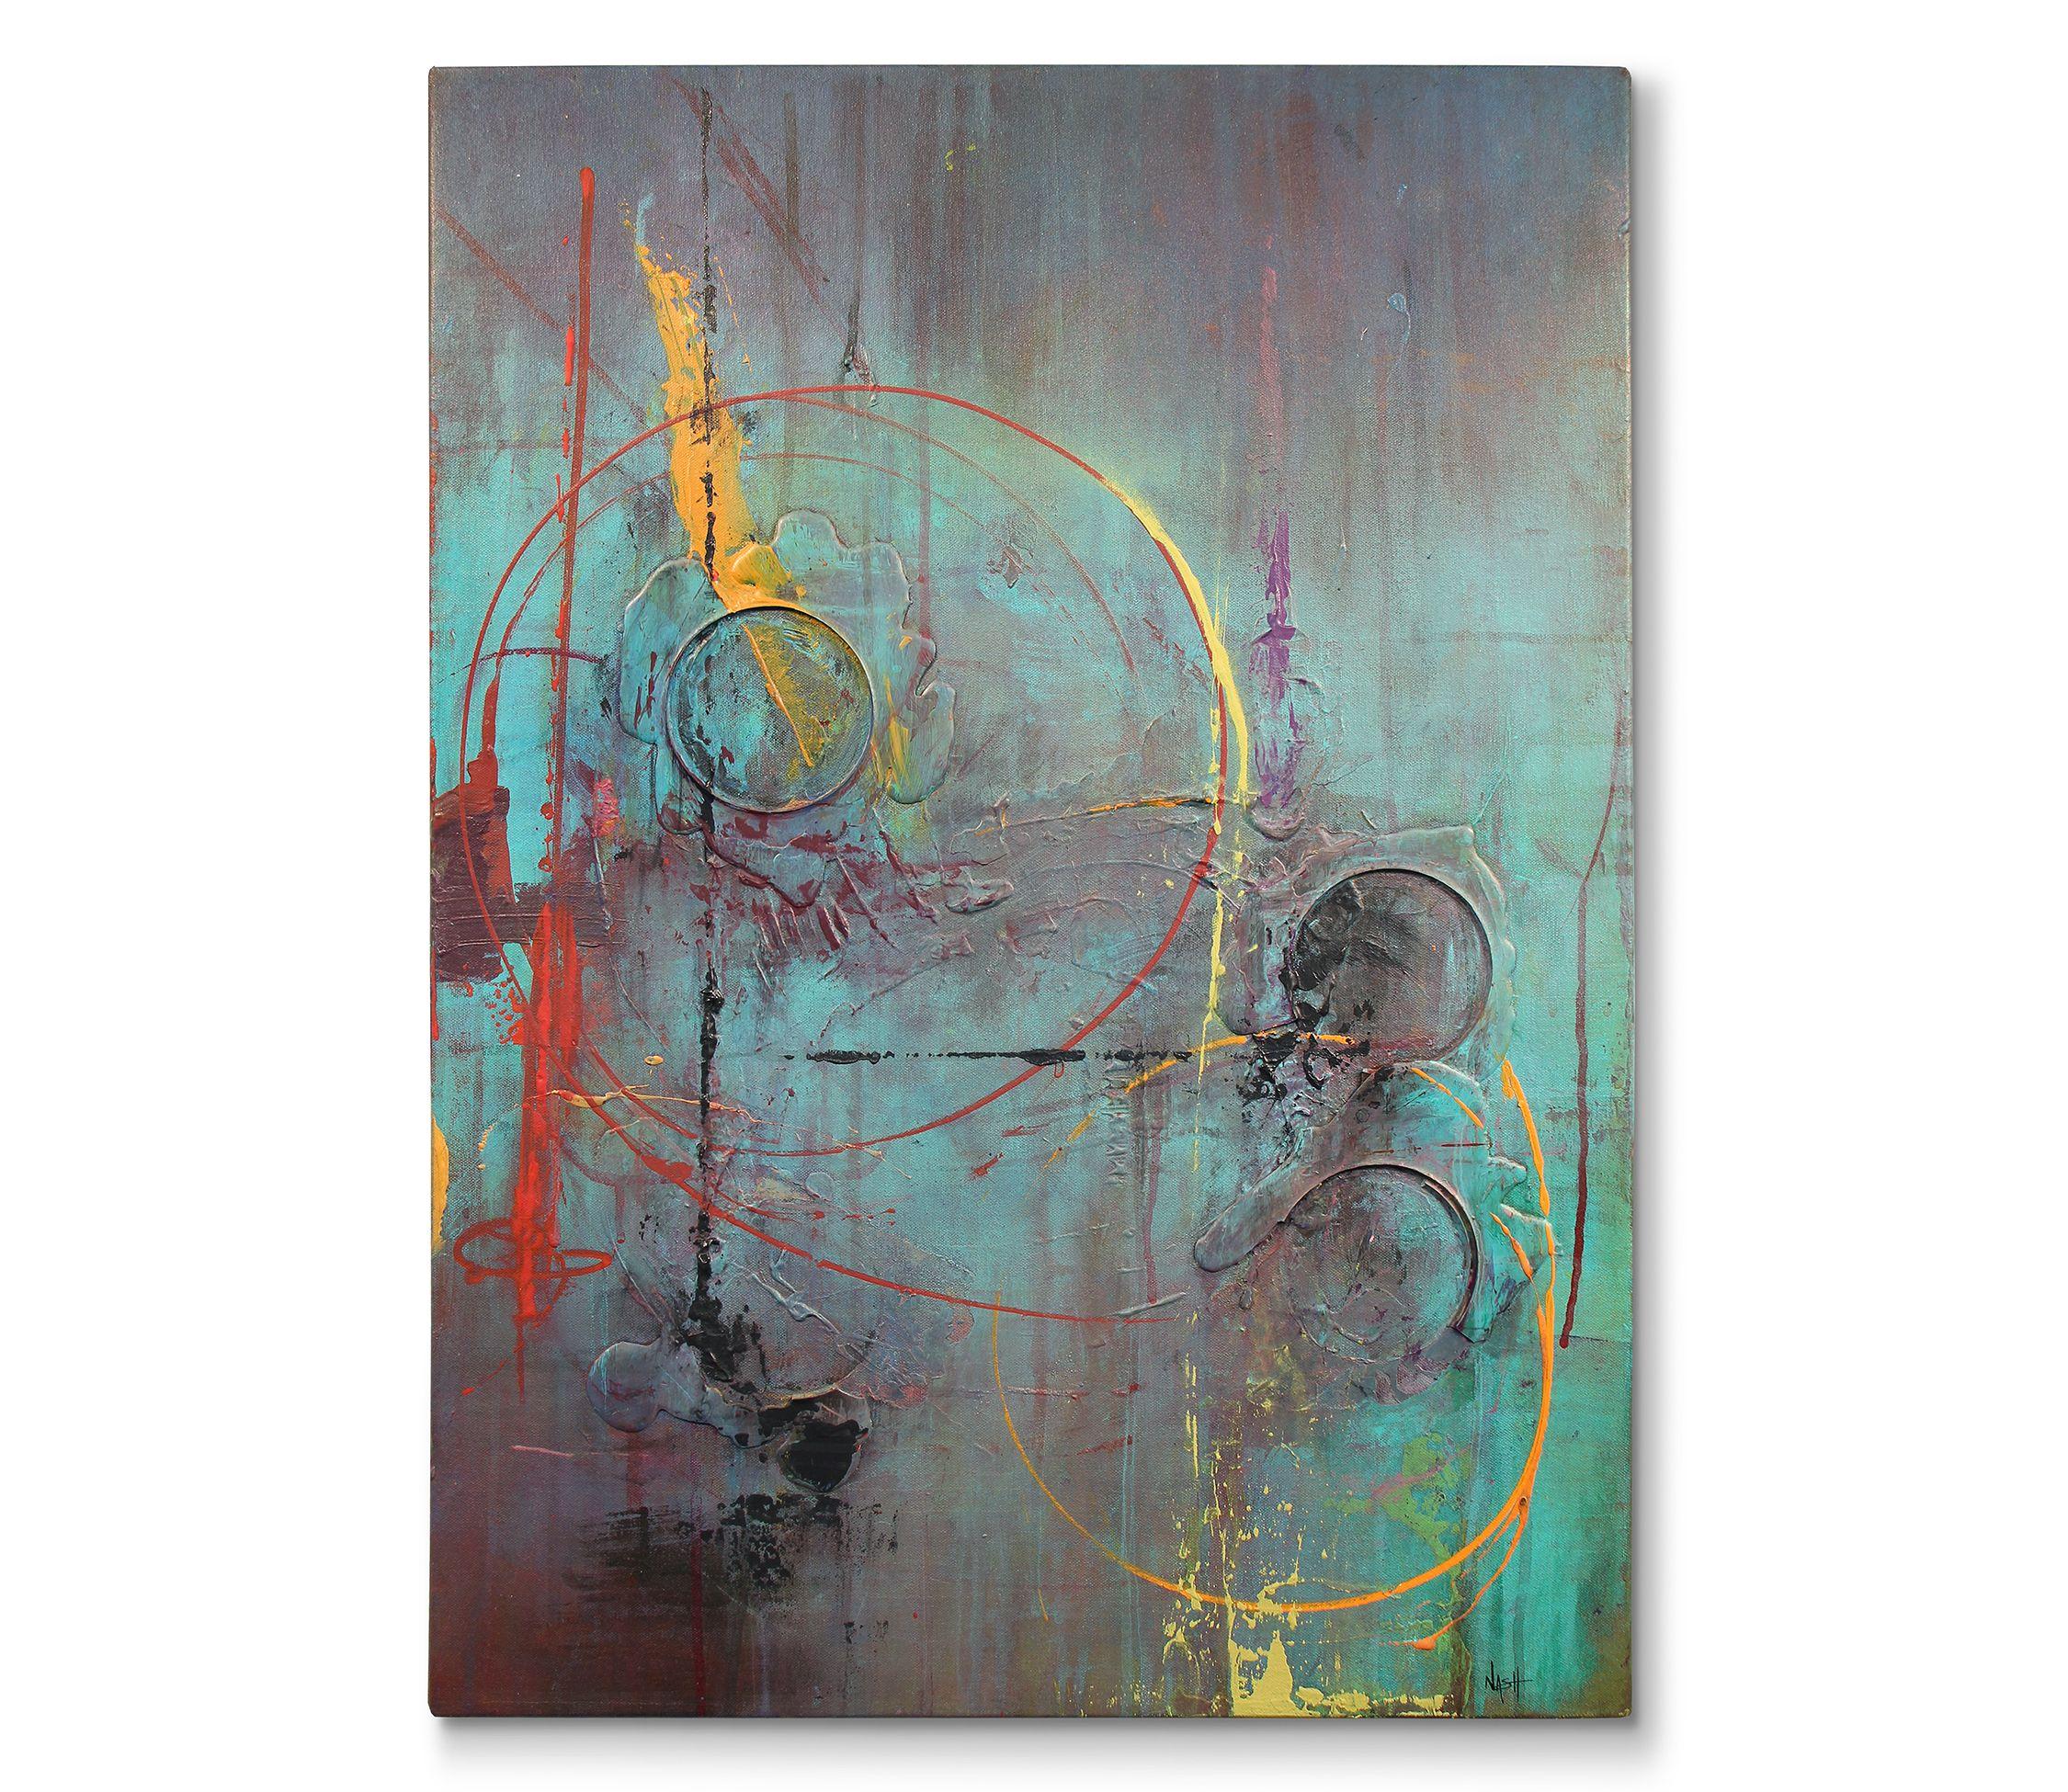 Dan Nash Gottfried Abstract Painting - 'Radioactive', Painting, Acrylic on Canvas